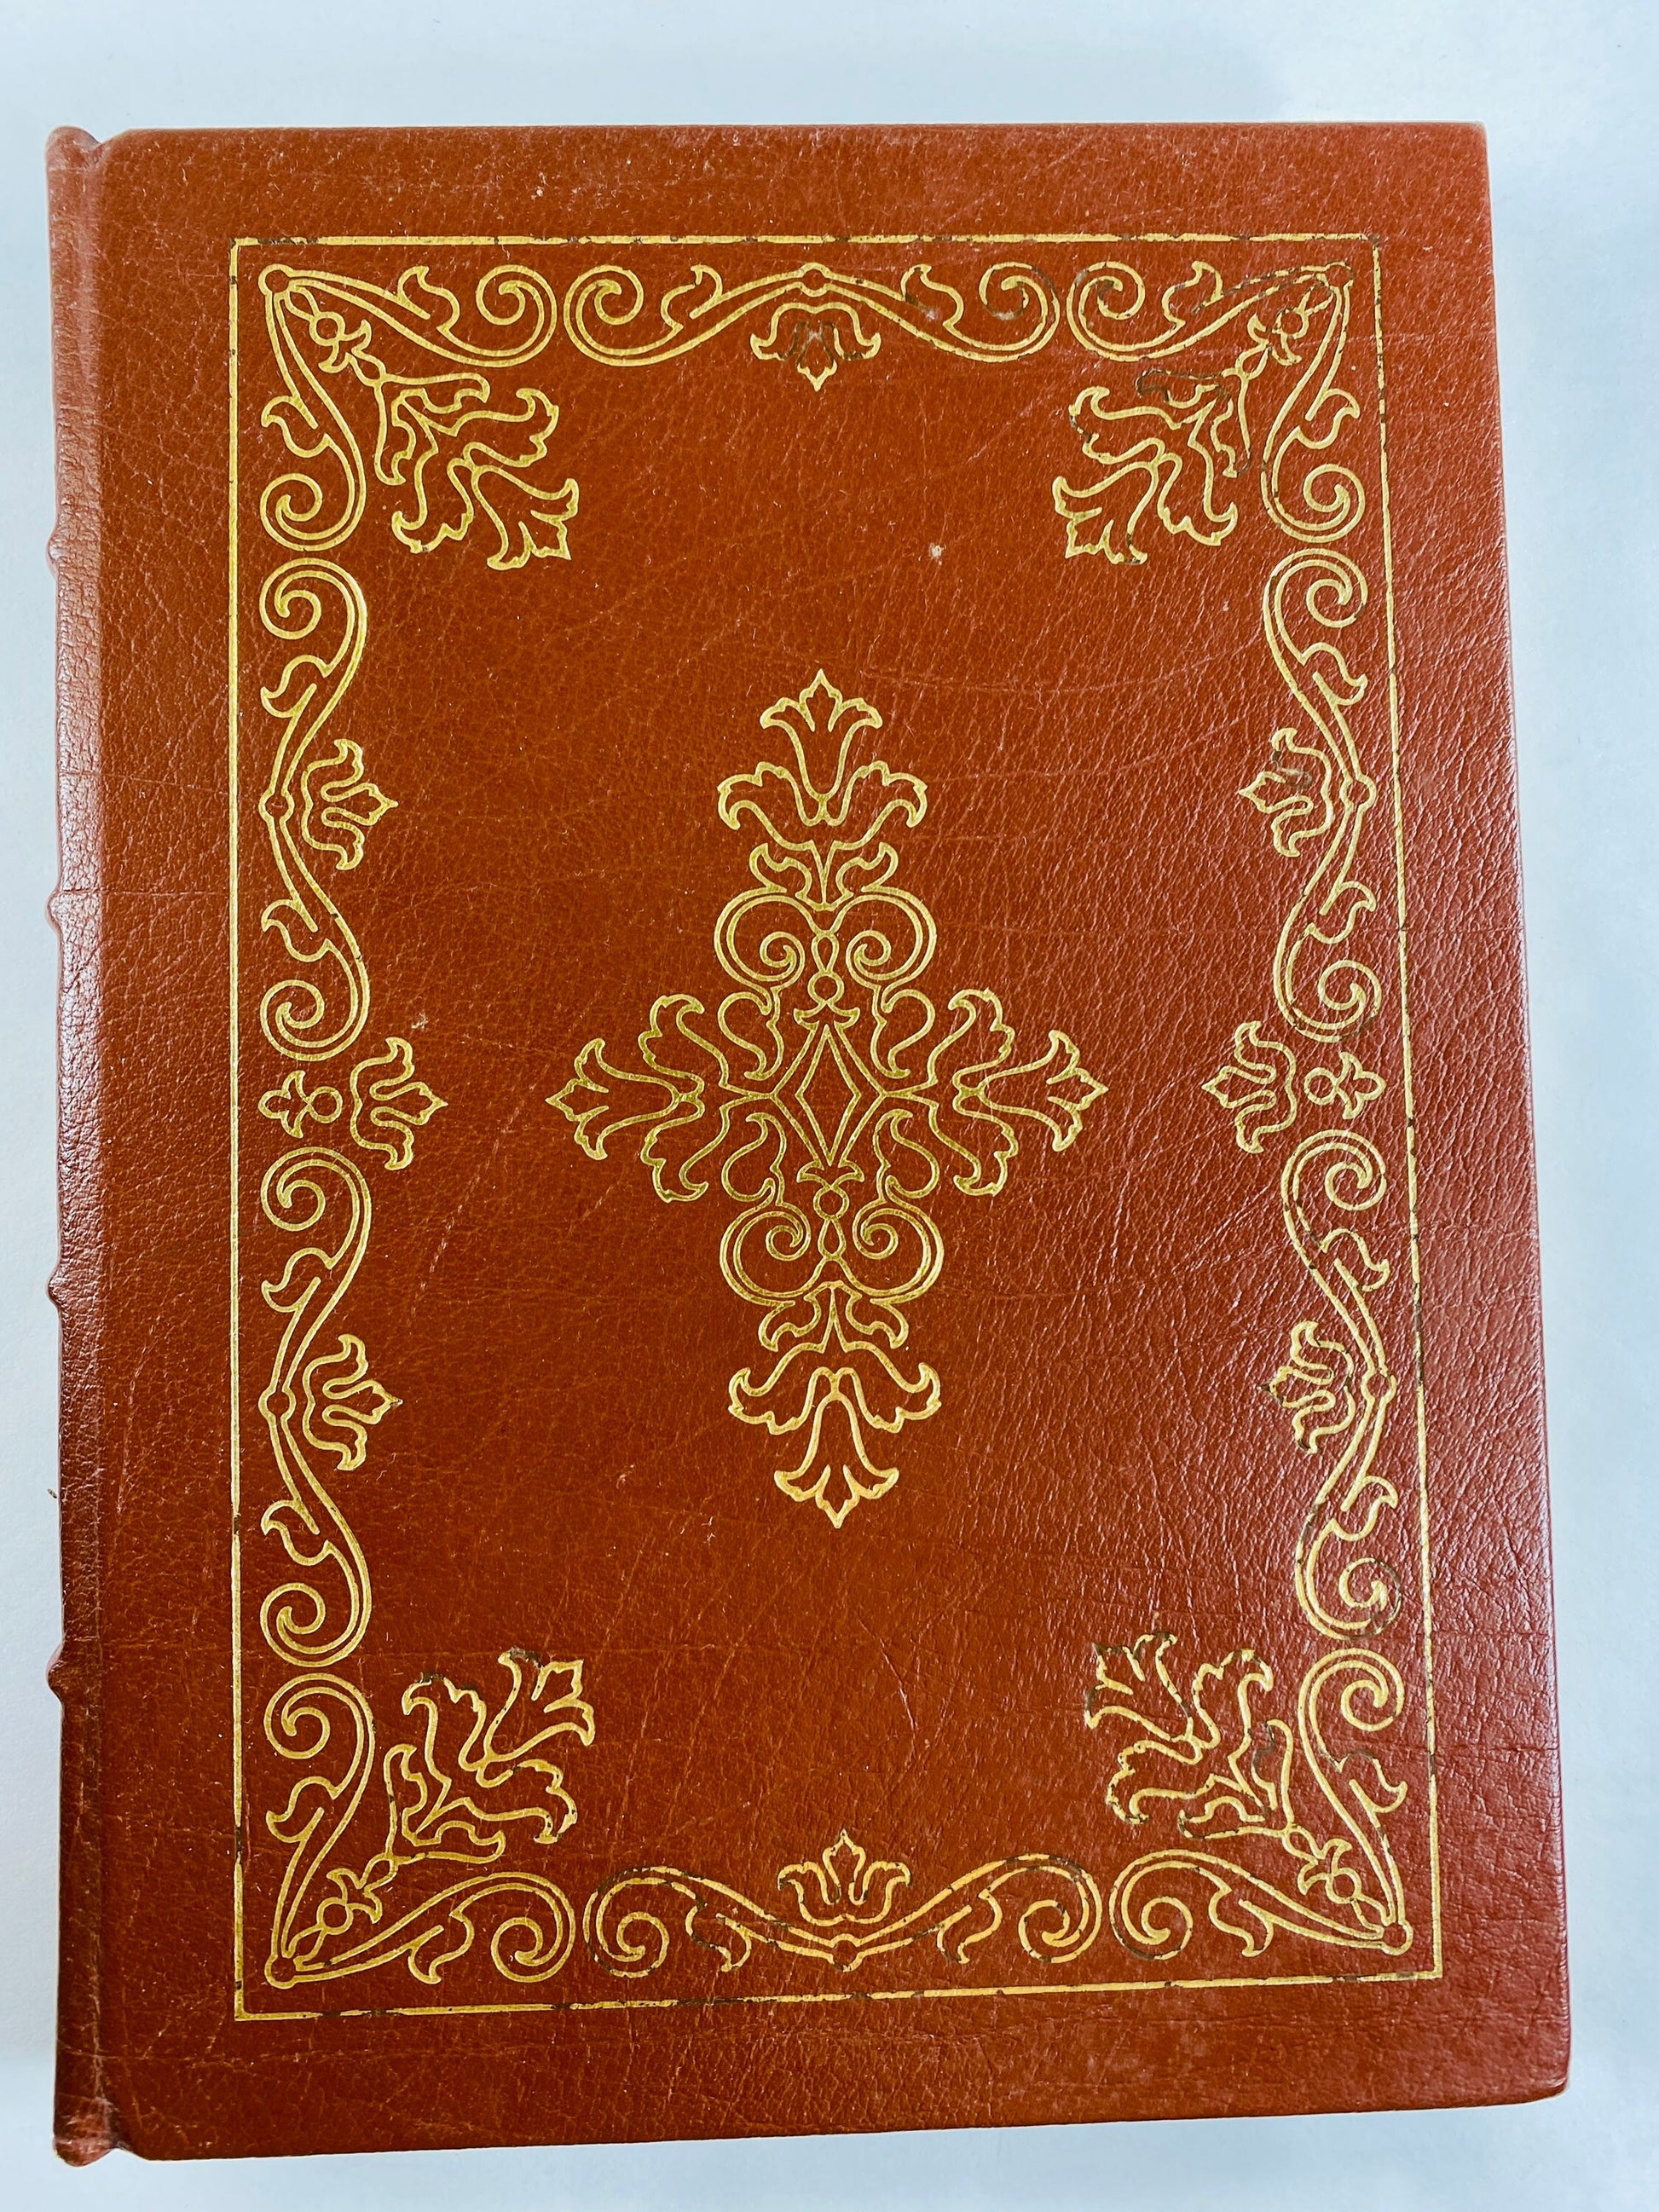 Anton Chekhov vintage Easton Press leather book brown & gold One of the greatest writers of modern times. Cherry Orchard, Three Sisters